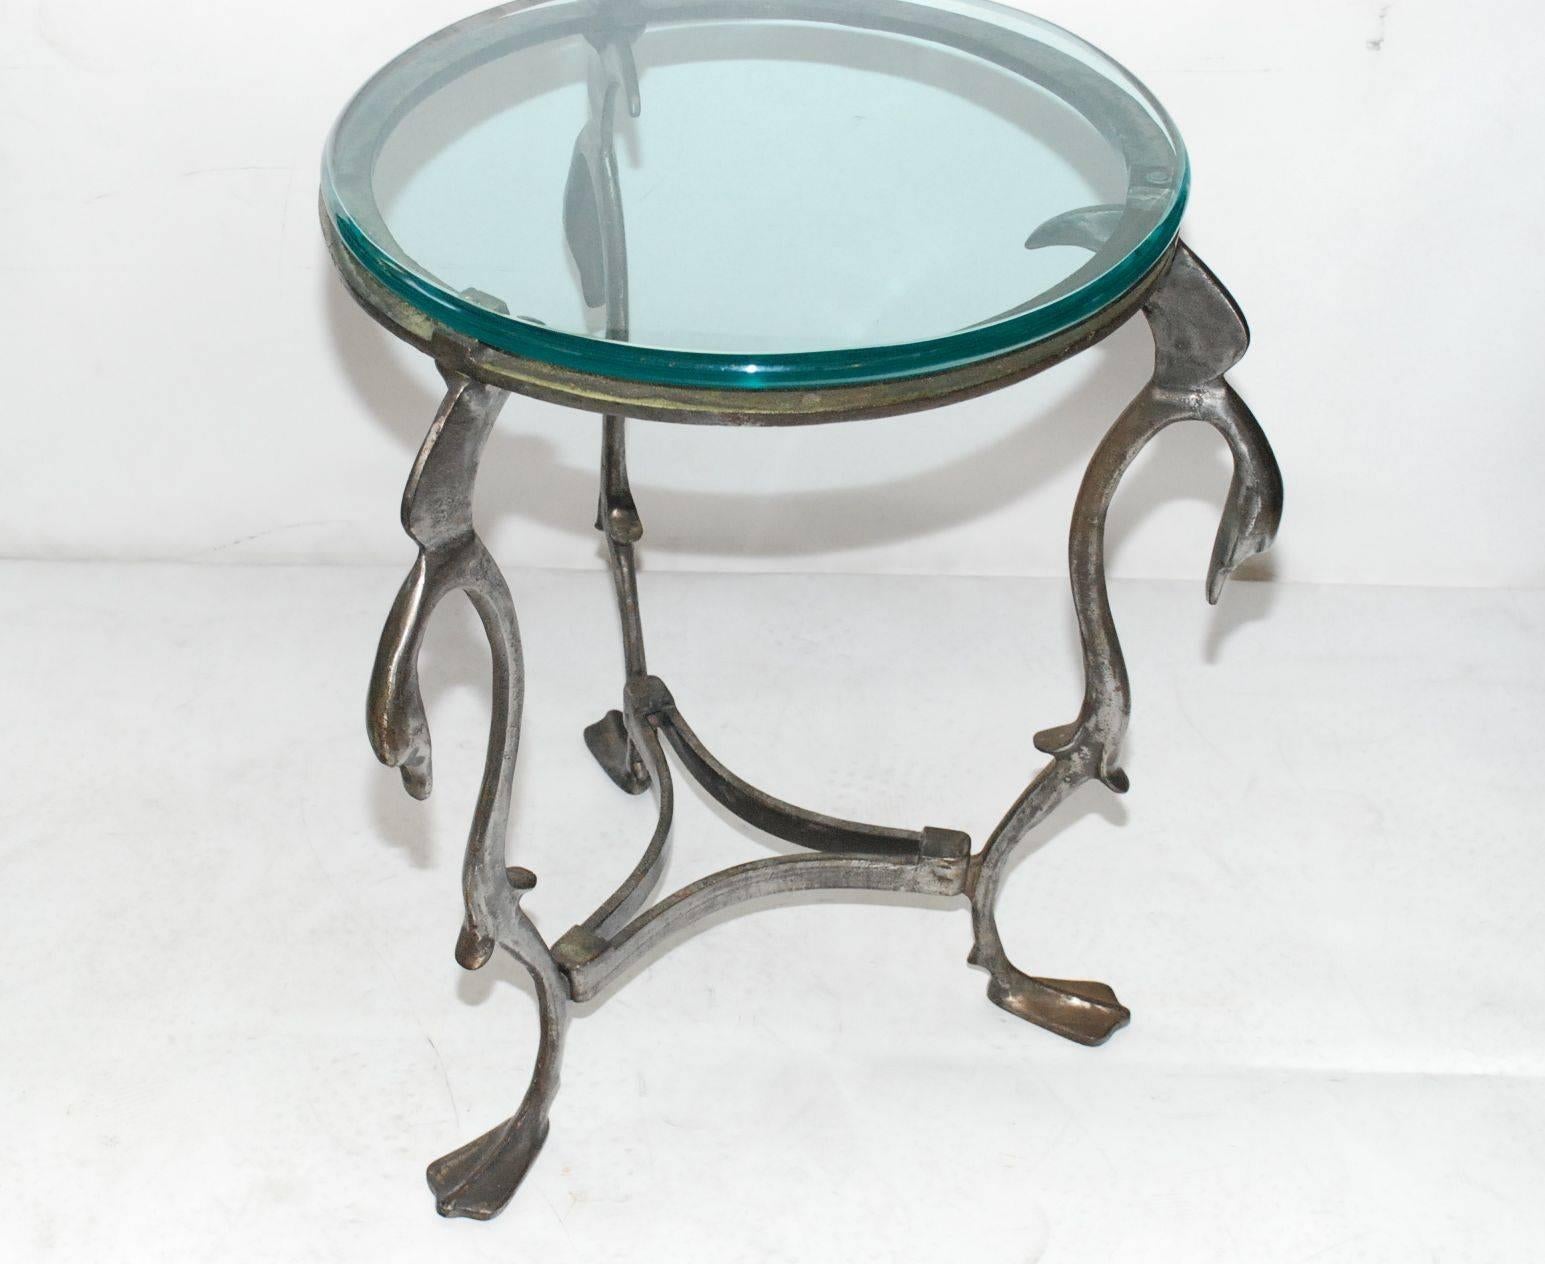 Antique finish three-legged swan occasional table made of iron. Topped with a round 1